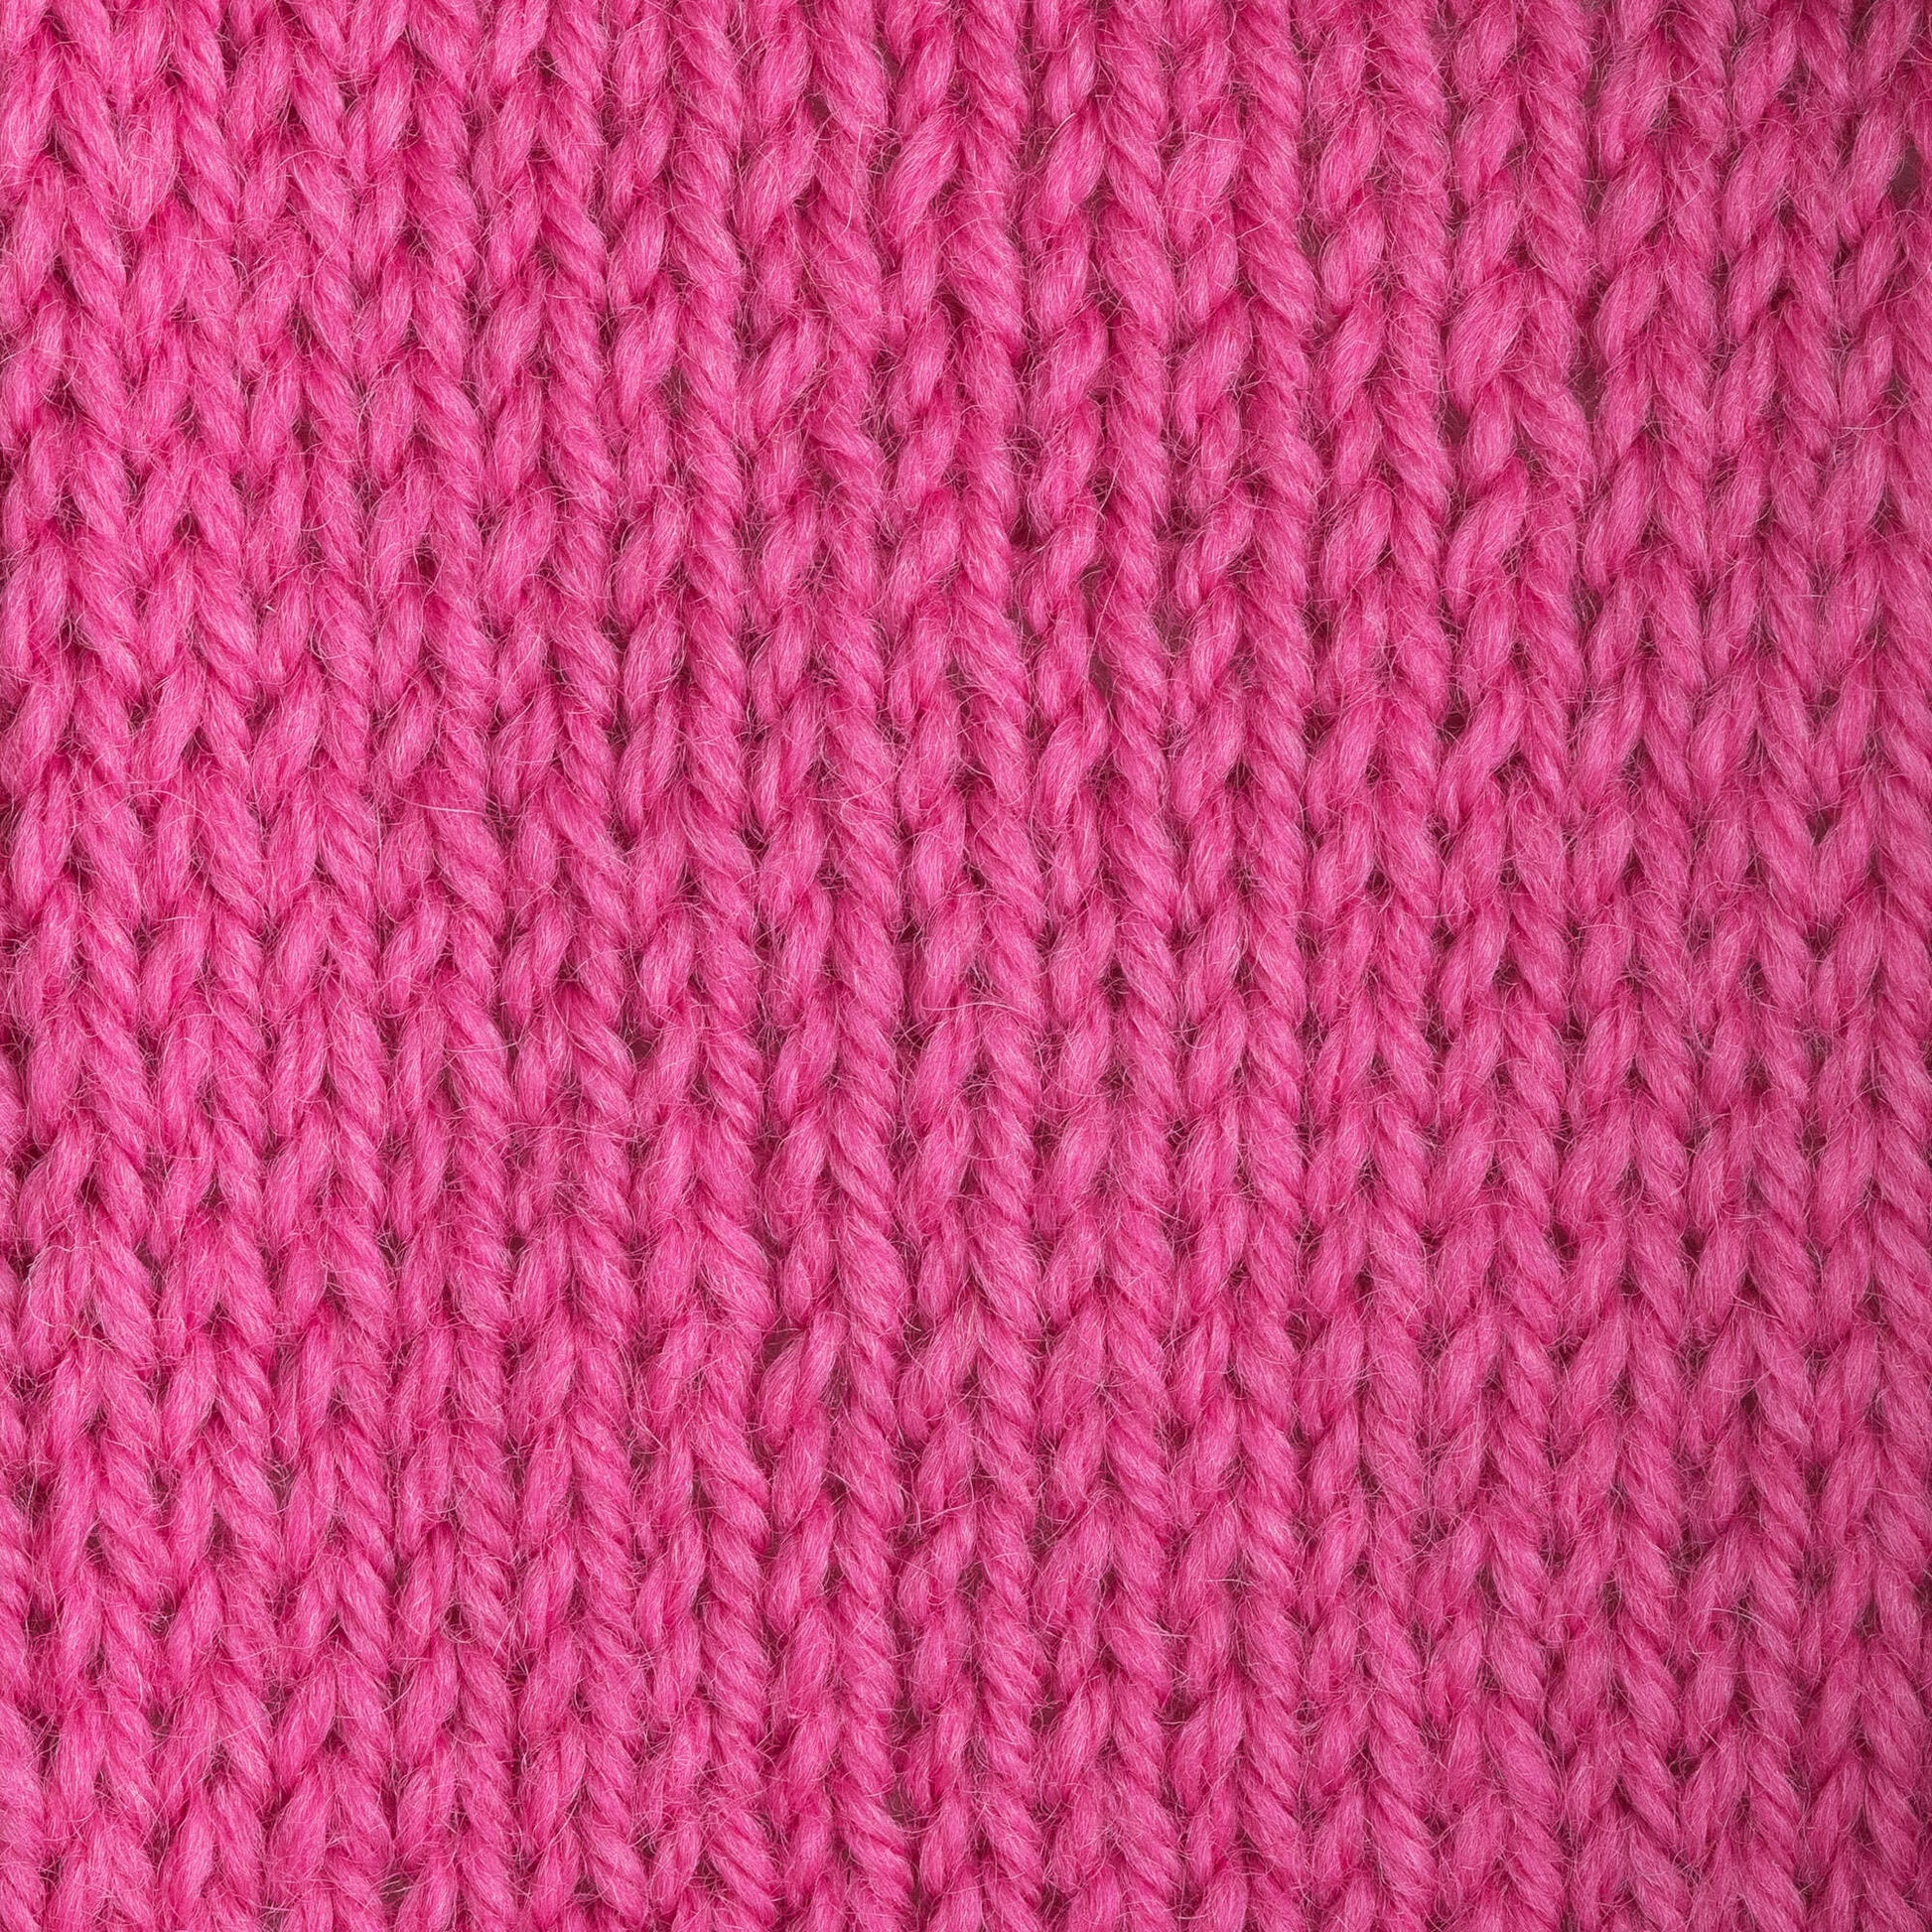 Patons Classic Wool Worsted Yarn - Discontinued Shades Magenta